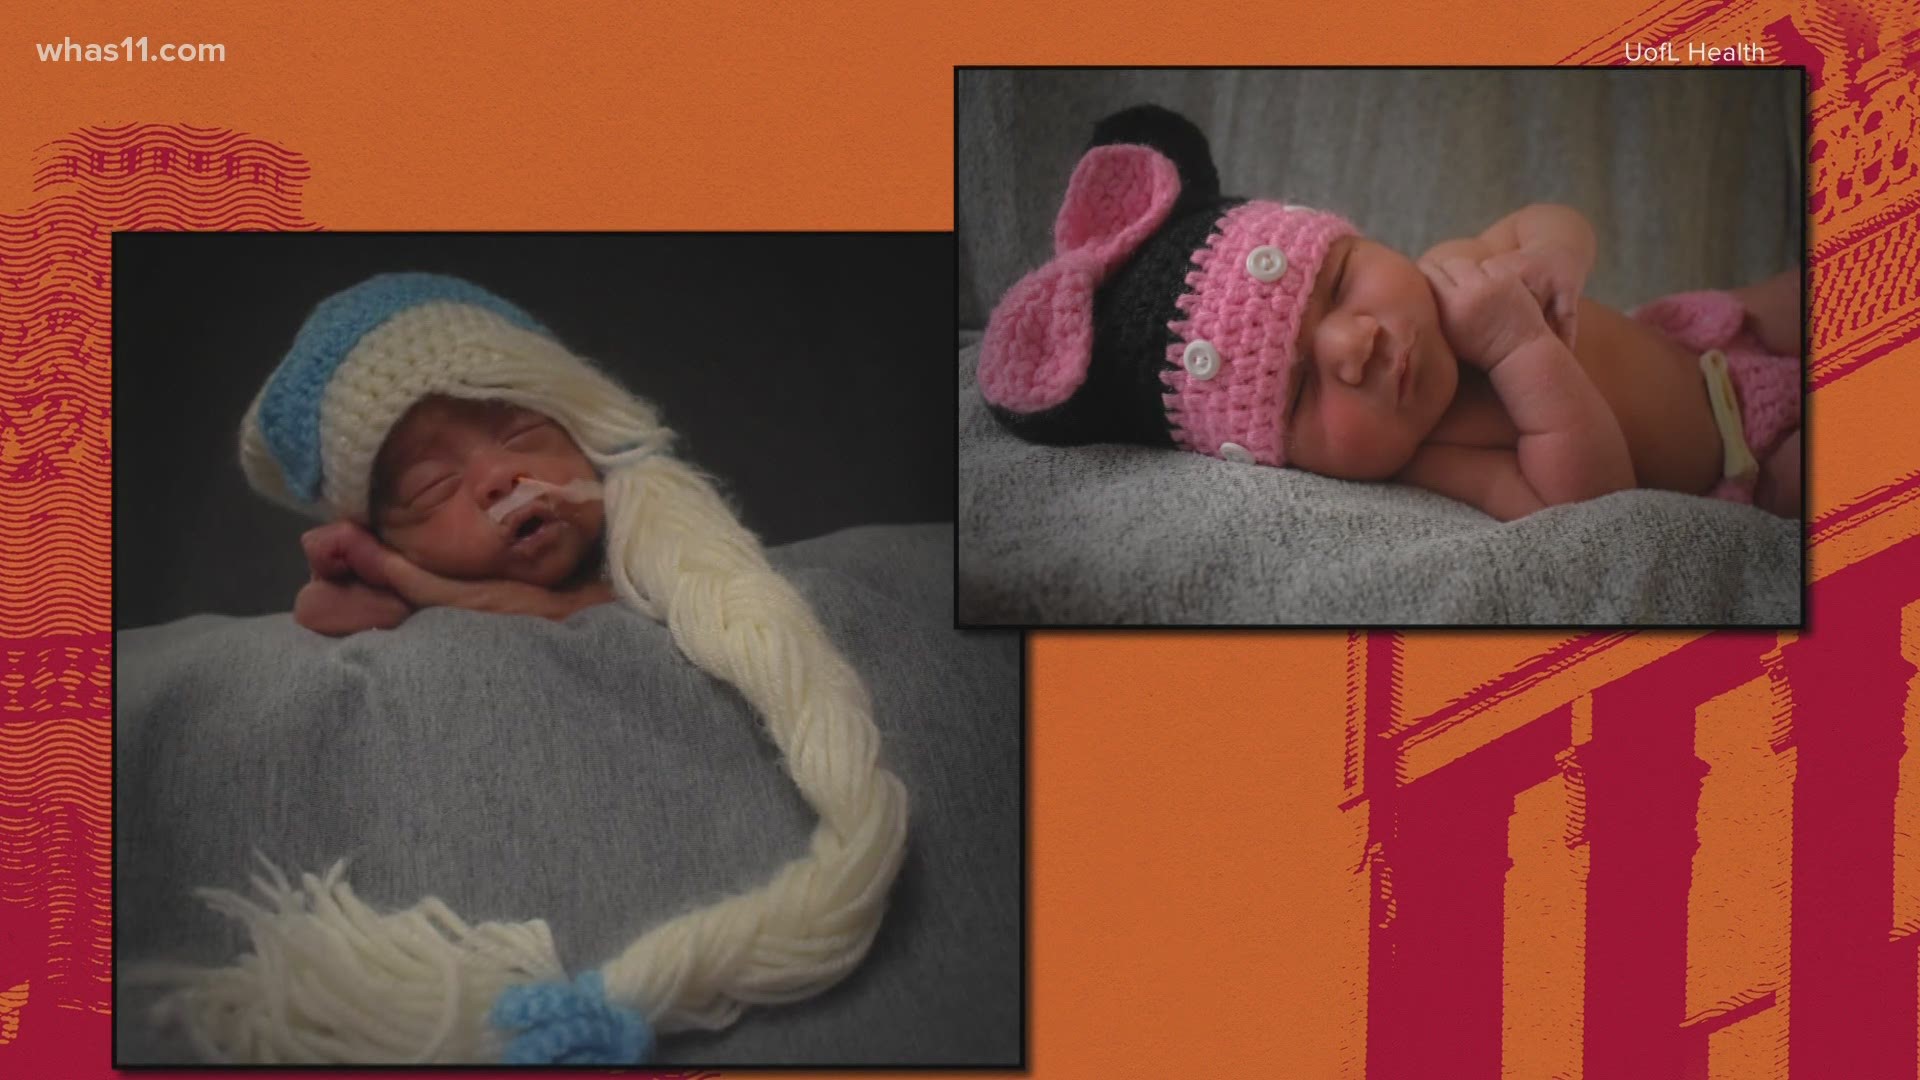 The babies at UofL Health are all dressed up for Halloween, with costumes made and donated by hospital volunteers.